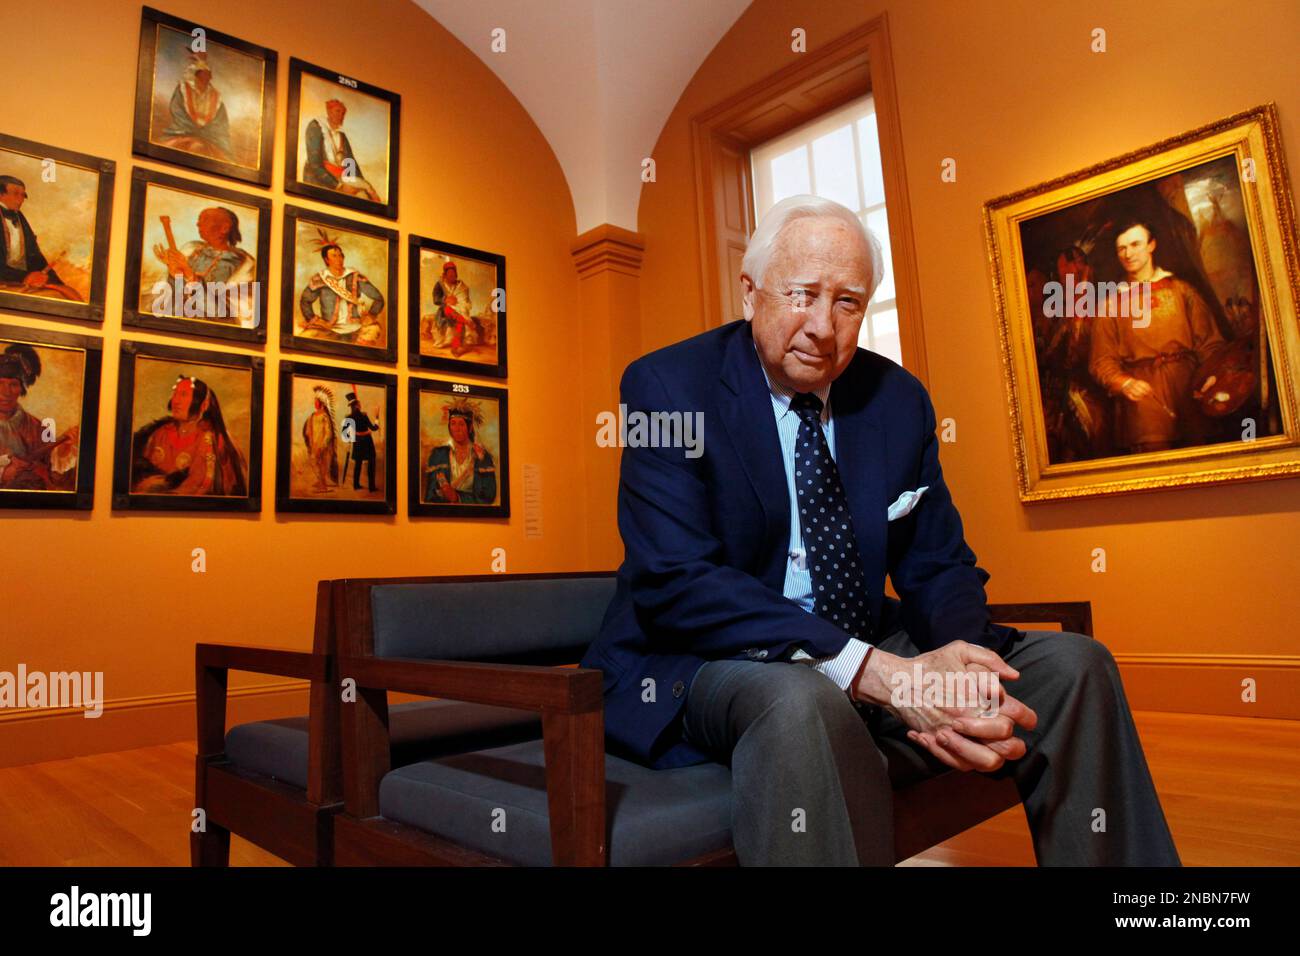 In this May 13, 2011 photo, historian and author David McCullough poses with art by George Catlin, one of the artists featured in his new book, "The Greater Journey," at the Catlin galleries of the Smithsonian American Art Museum in Washington. The book is about Americans in Paris in the 19th century. At left are Catlin's paintings, at right is a painting of Caltin by William Fisk. (AP Photo/Jacquelyn Martin) Stock Photo